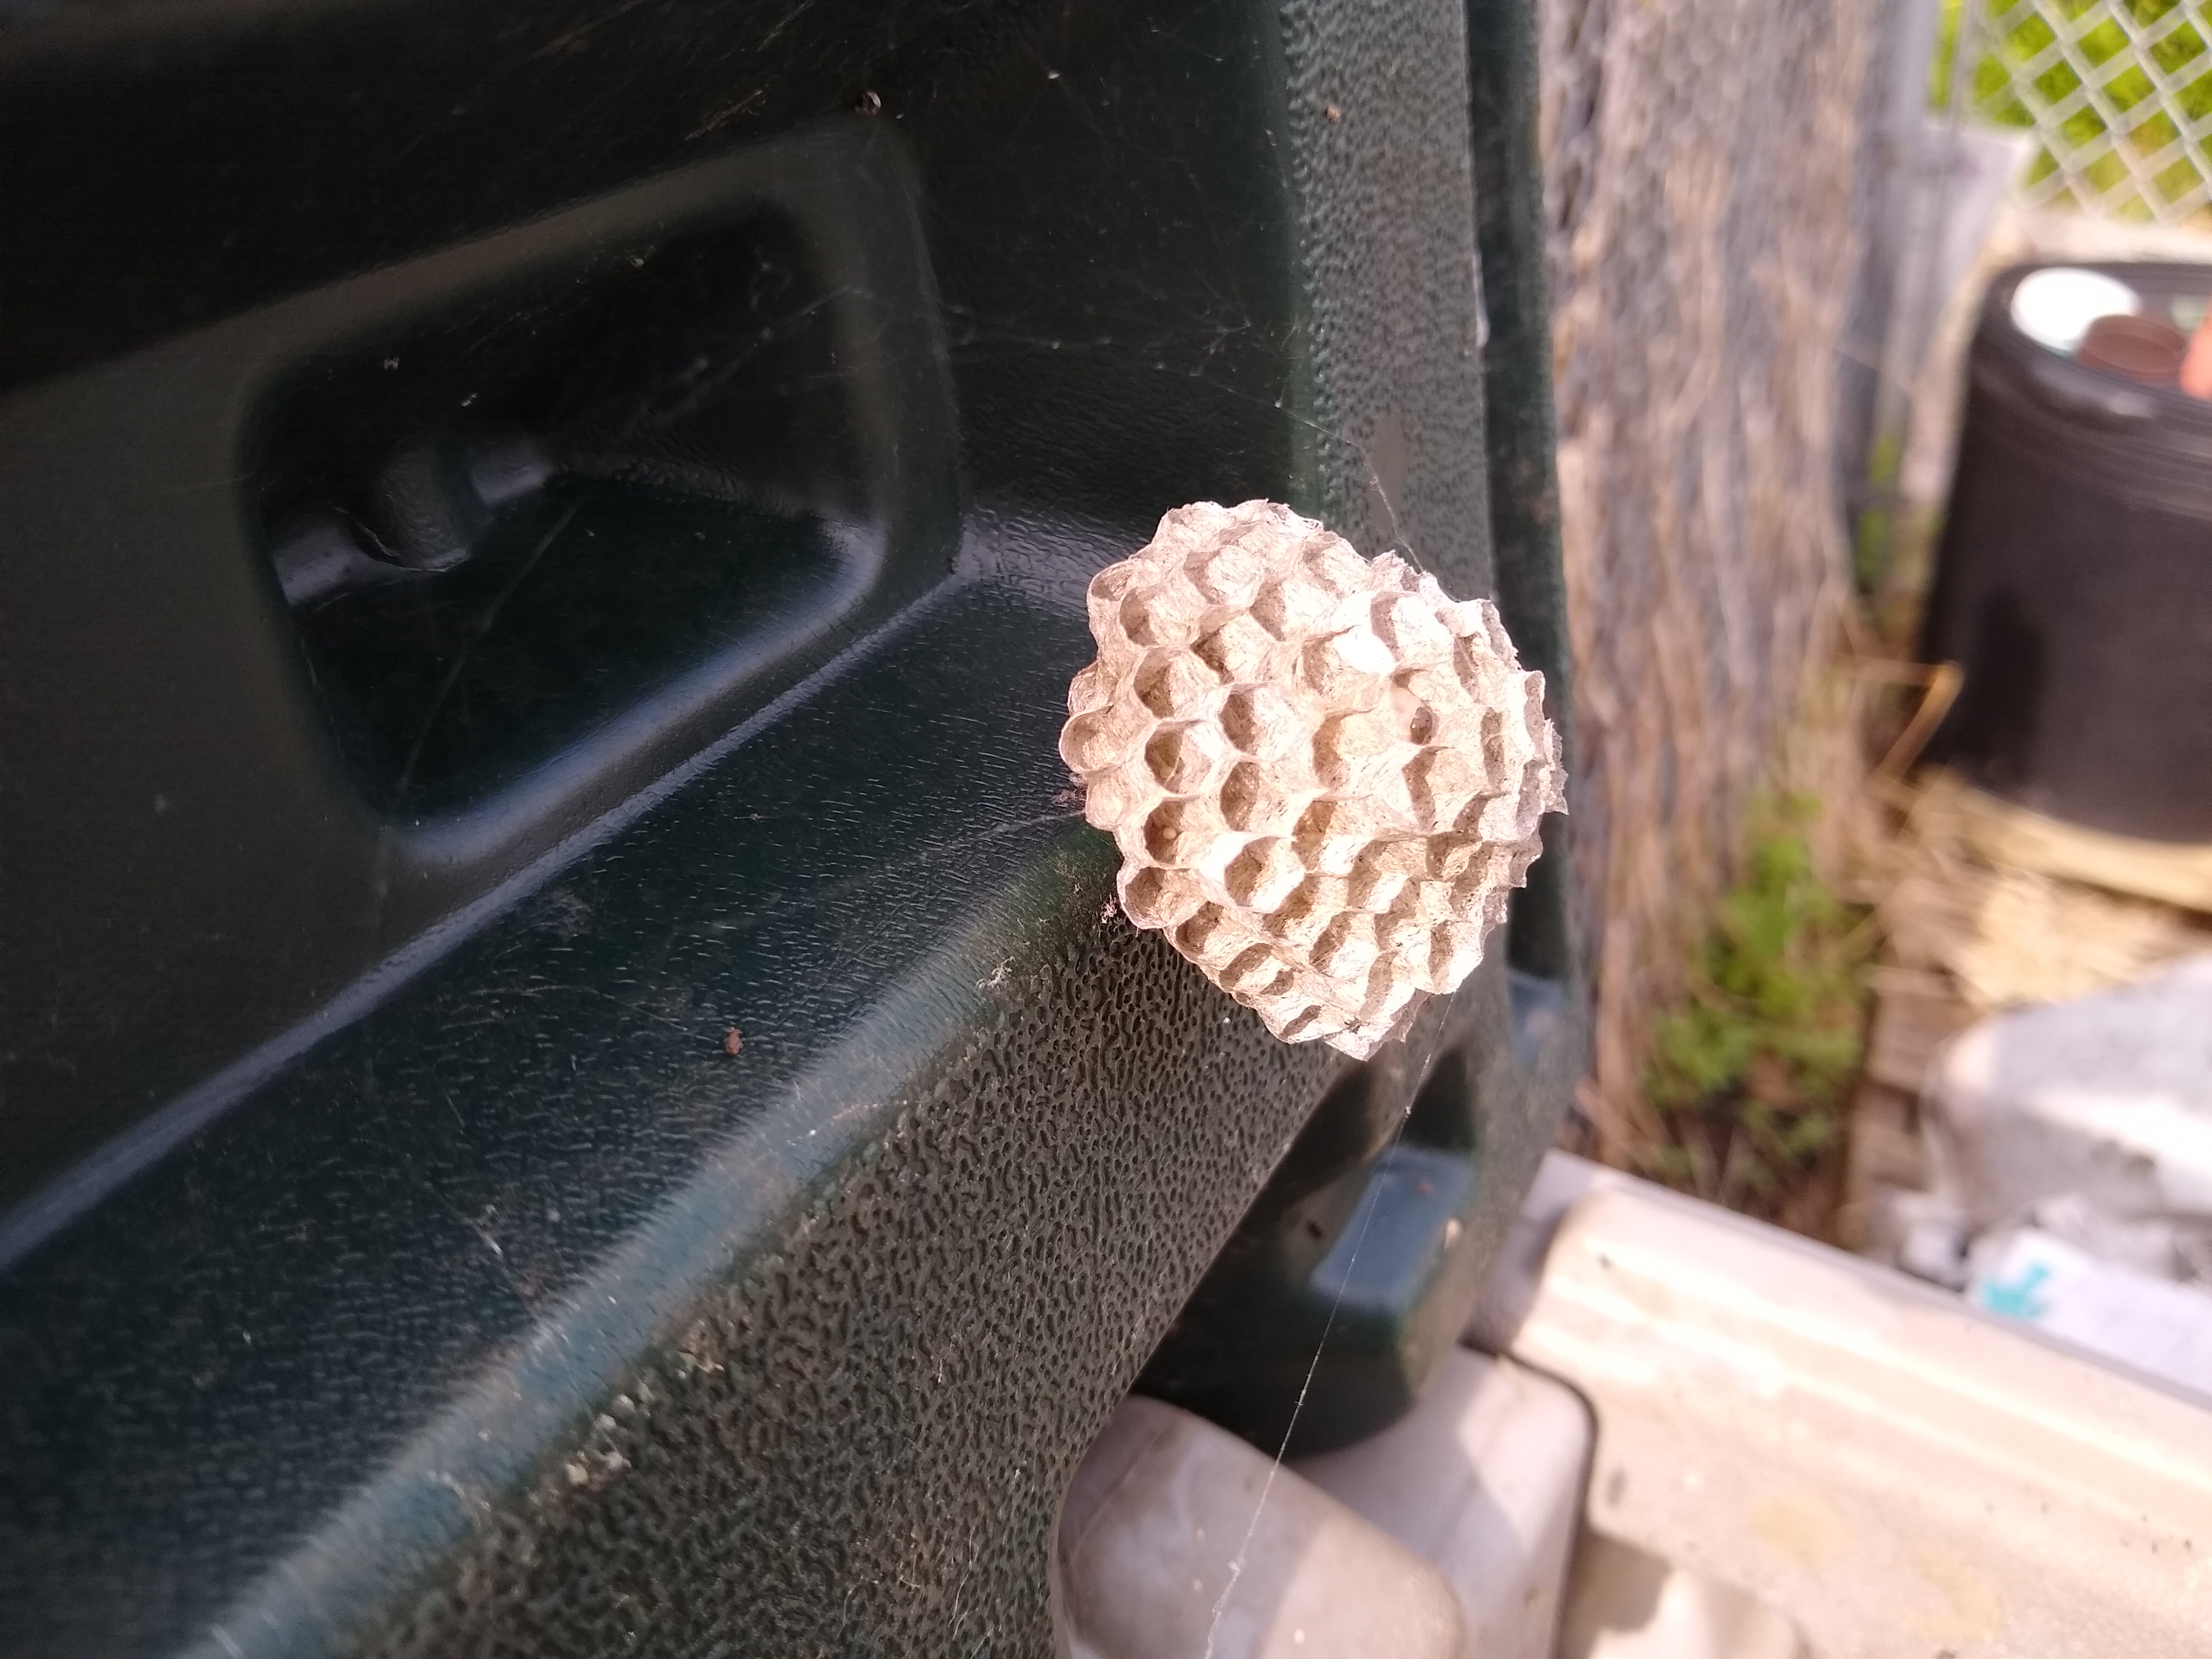 A wasp nest.